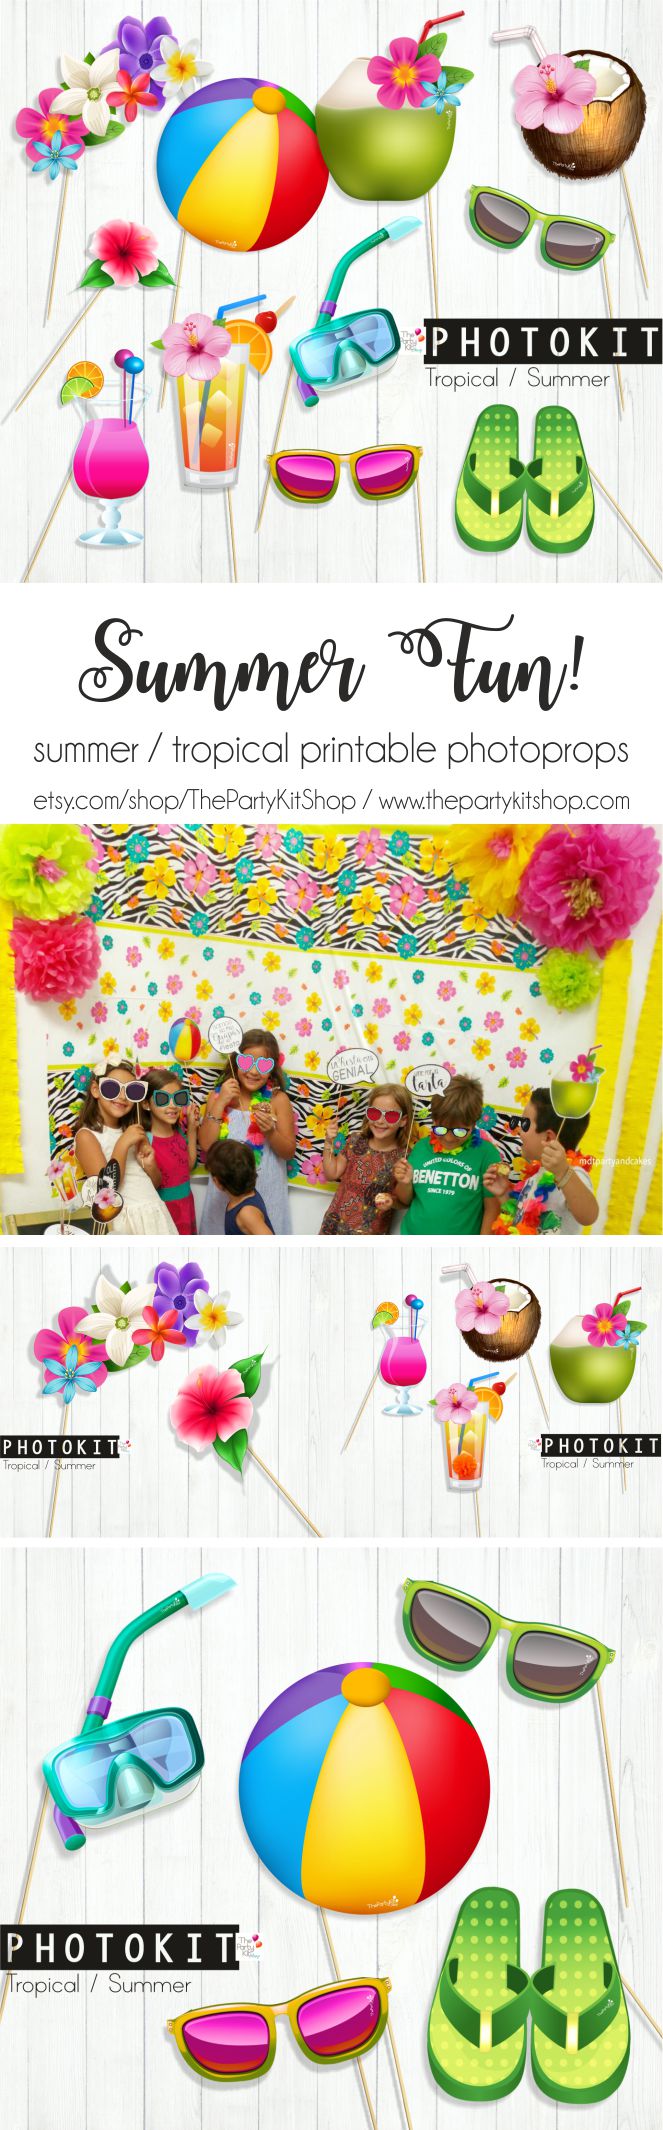 Printable summer Photoprops